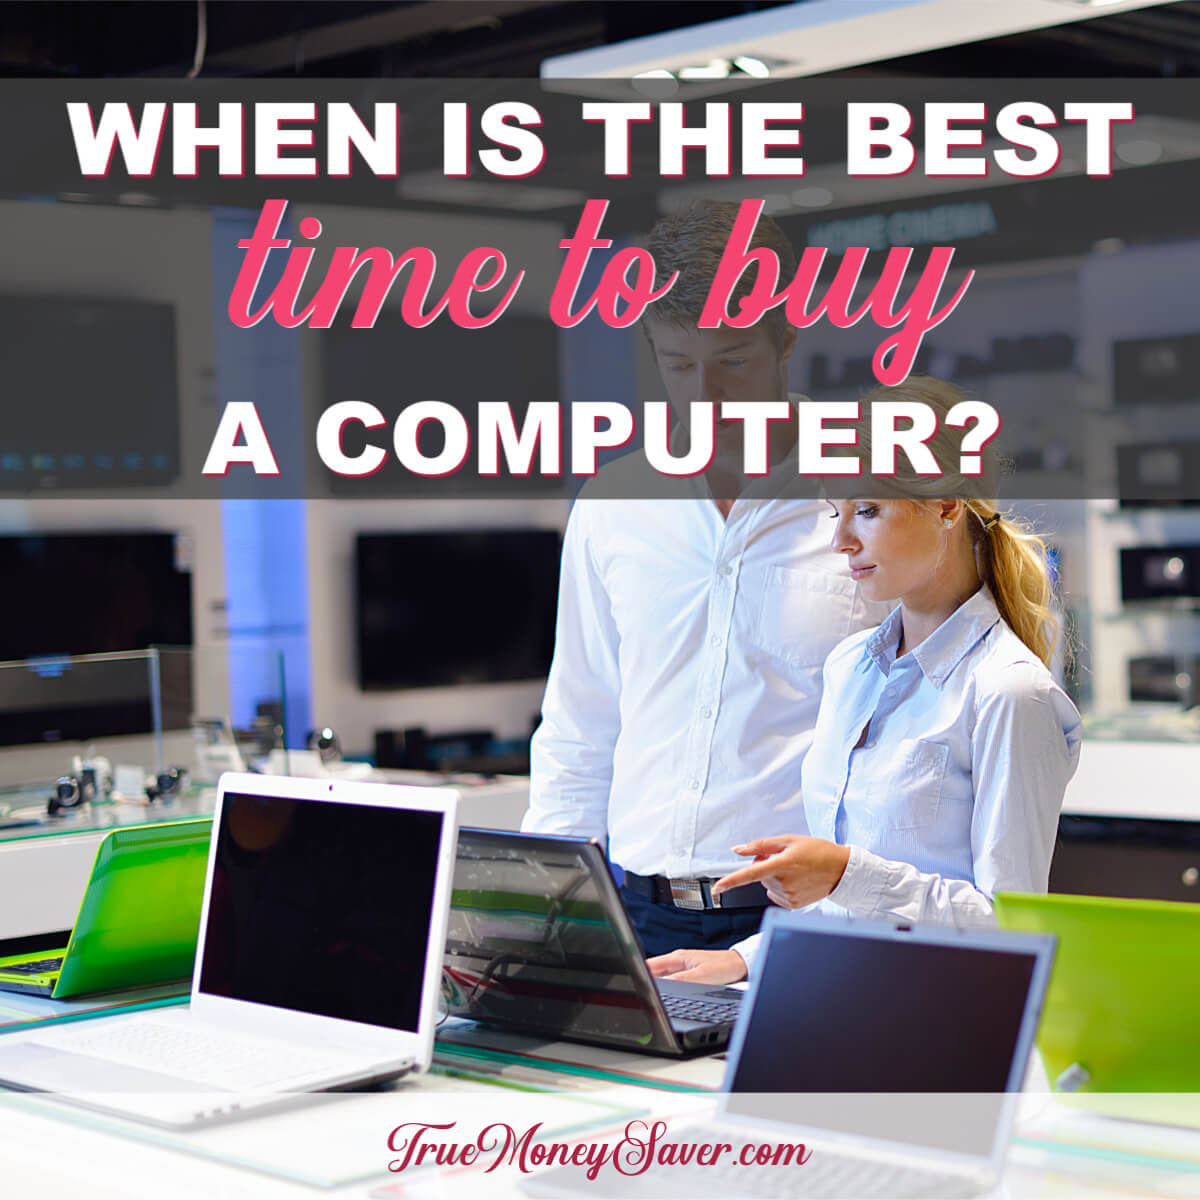 When Is The Best Time To Buy A Computer?